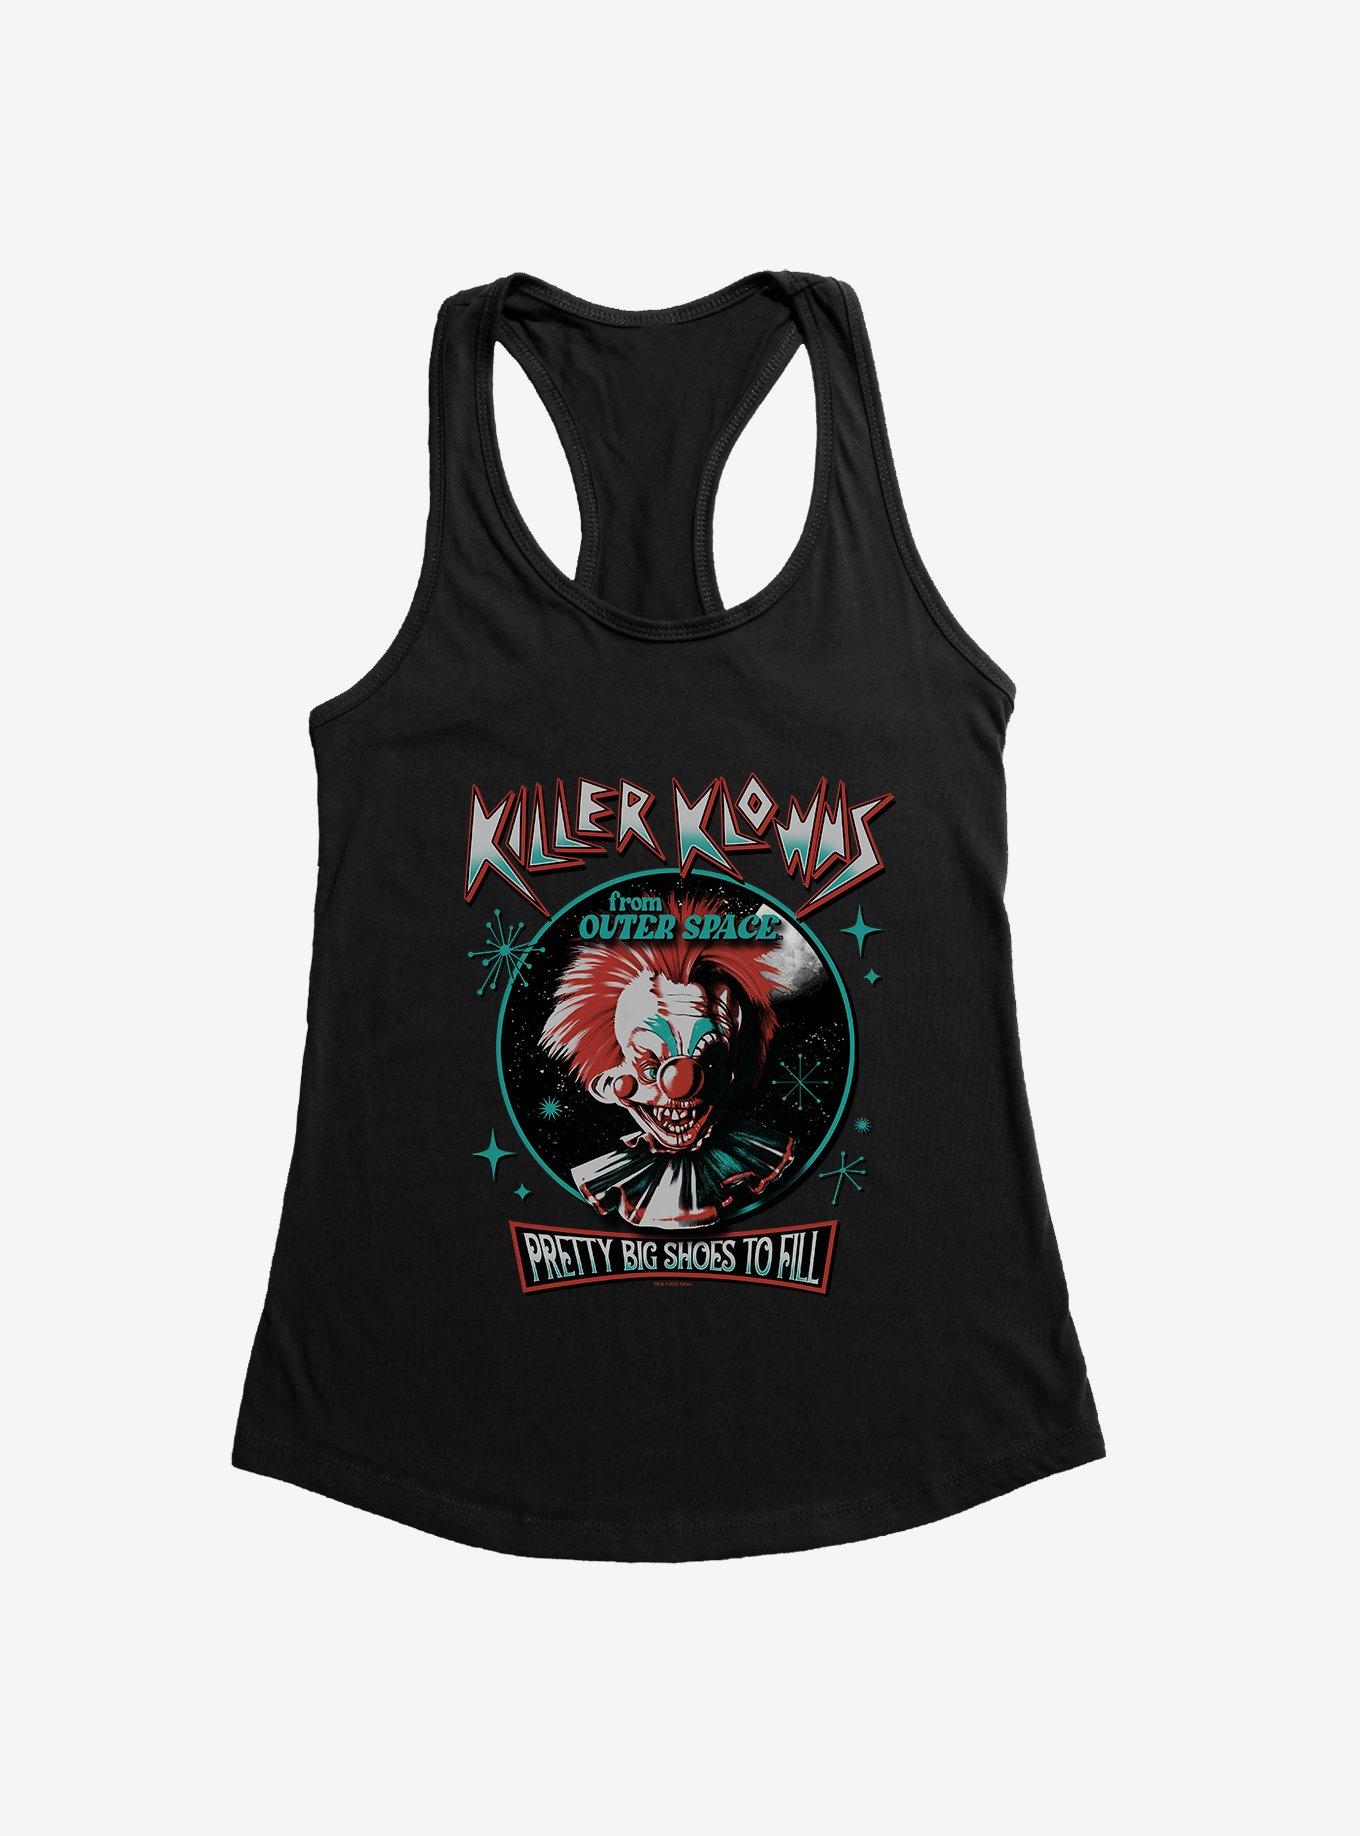 Killer Klowns From Outer Space Pretty Big Shoes To Fill Girls Tank, BLACK, hi-res